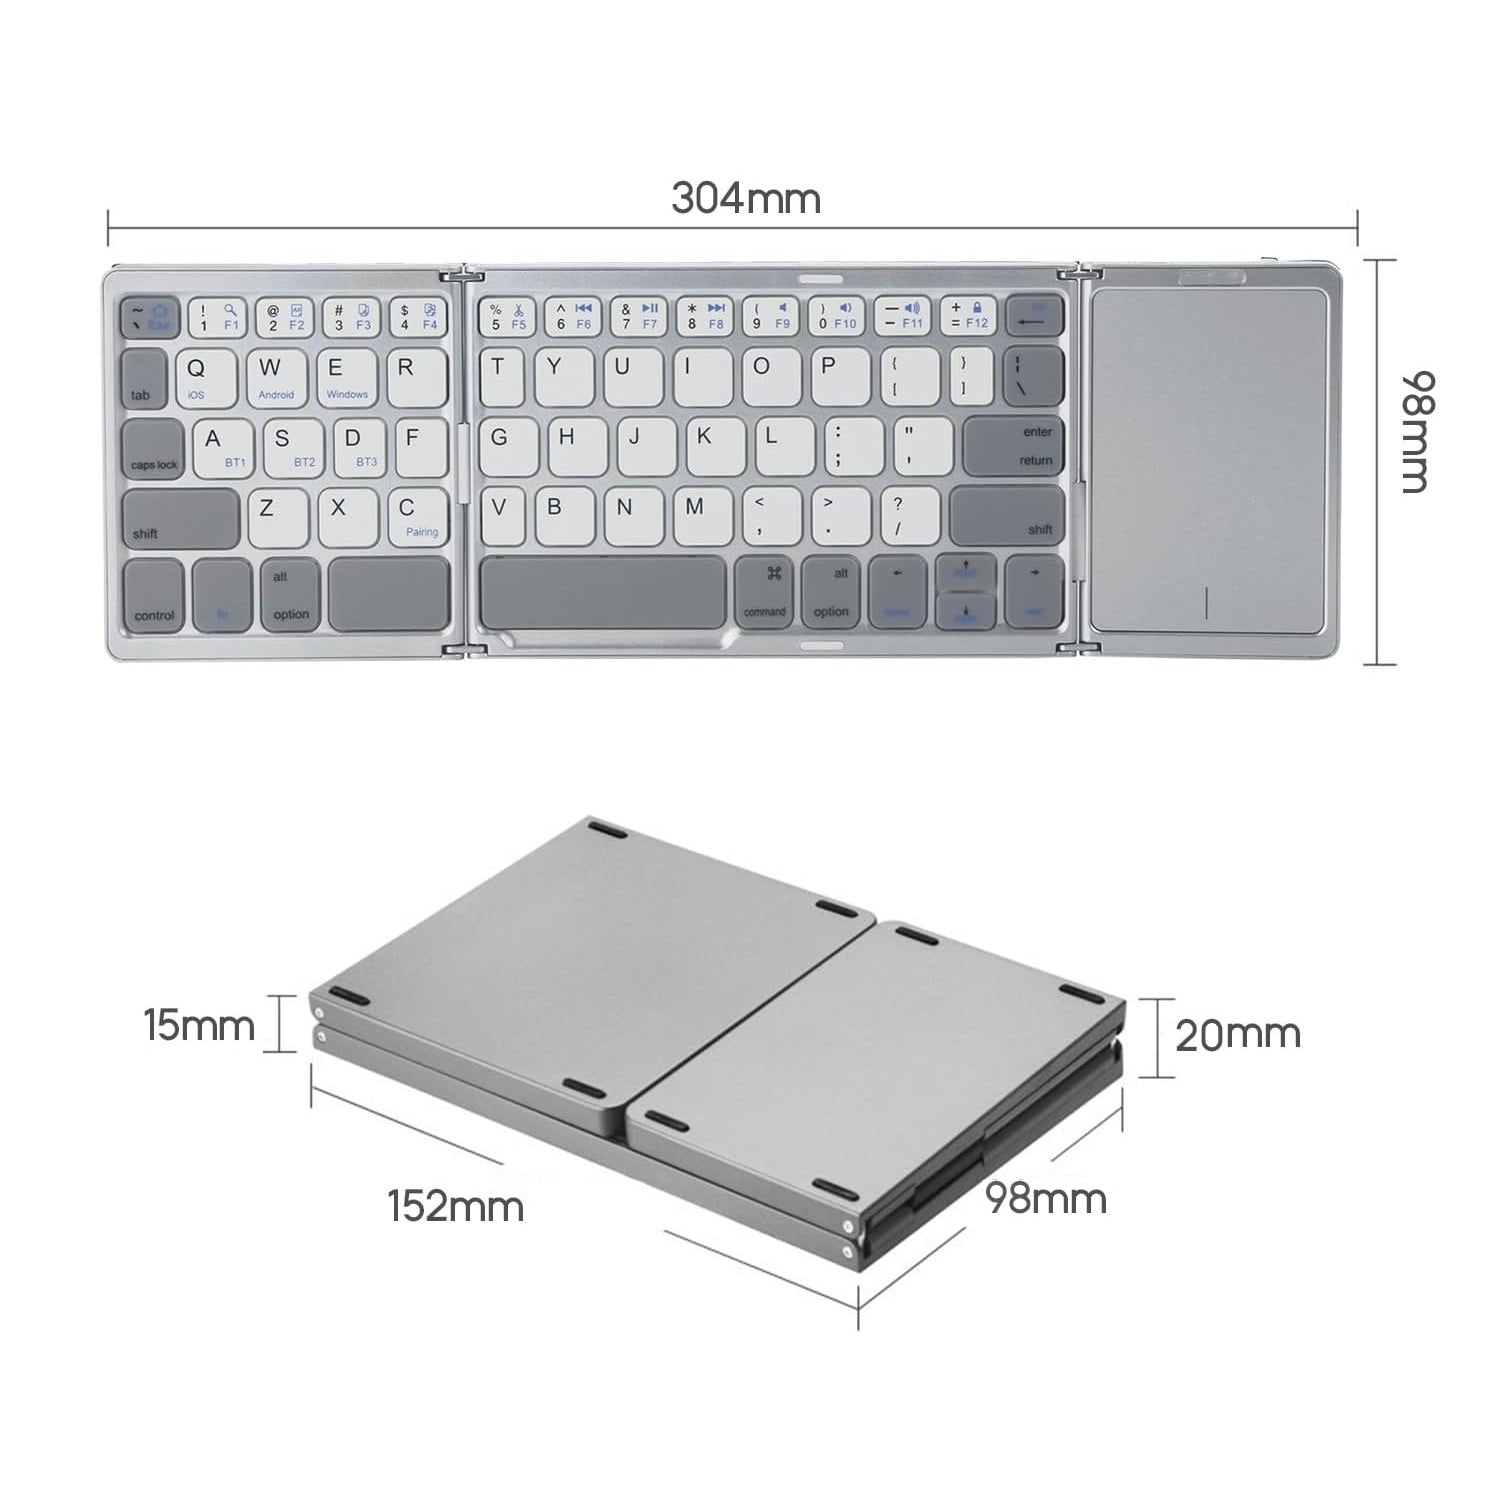 Portable Mini 3 Layer Foldable Bluetooth Keyboard with Trackpad